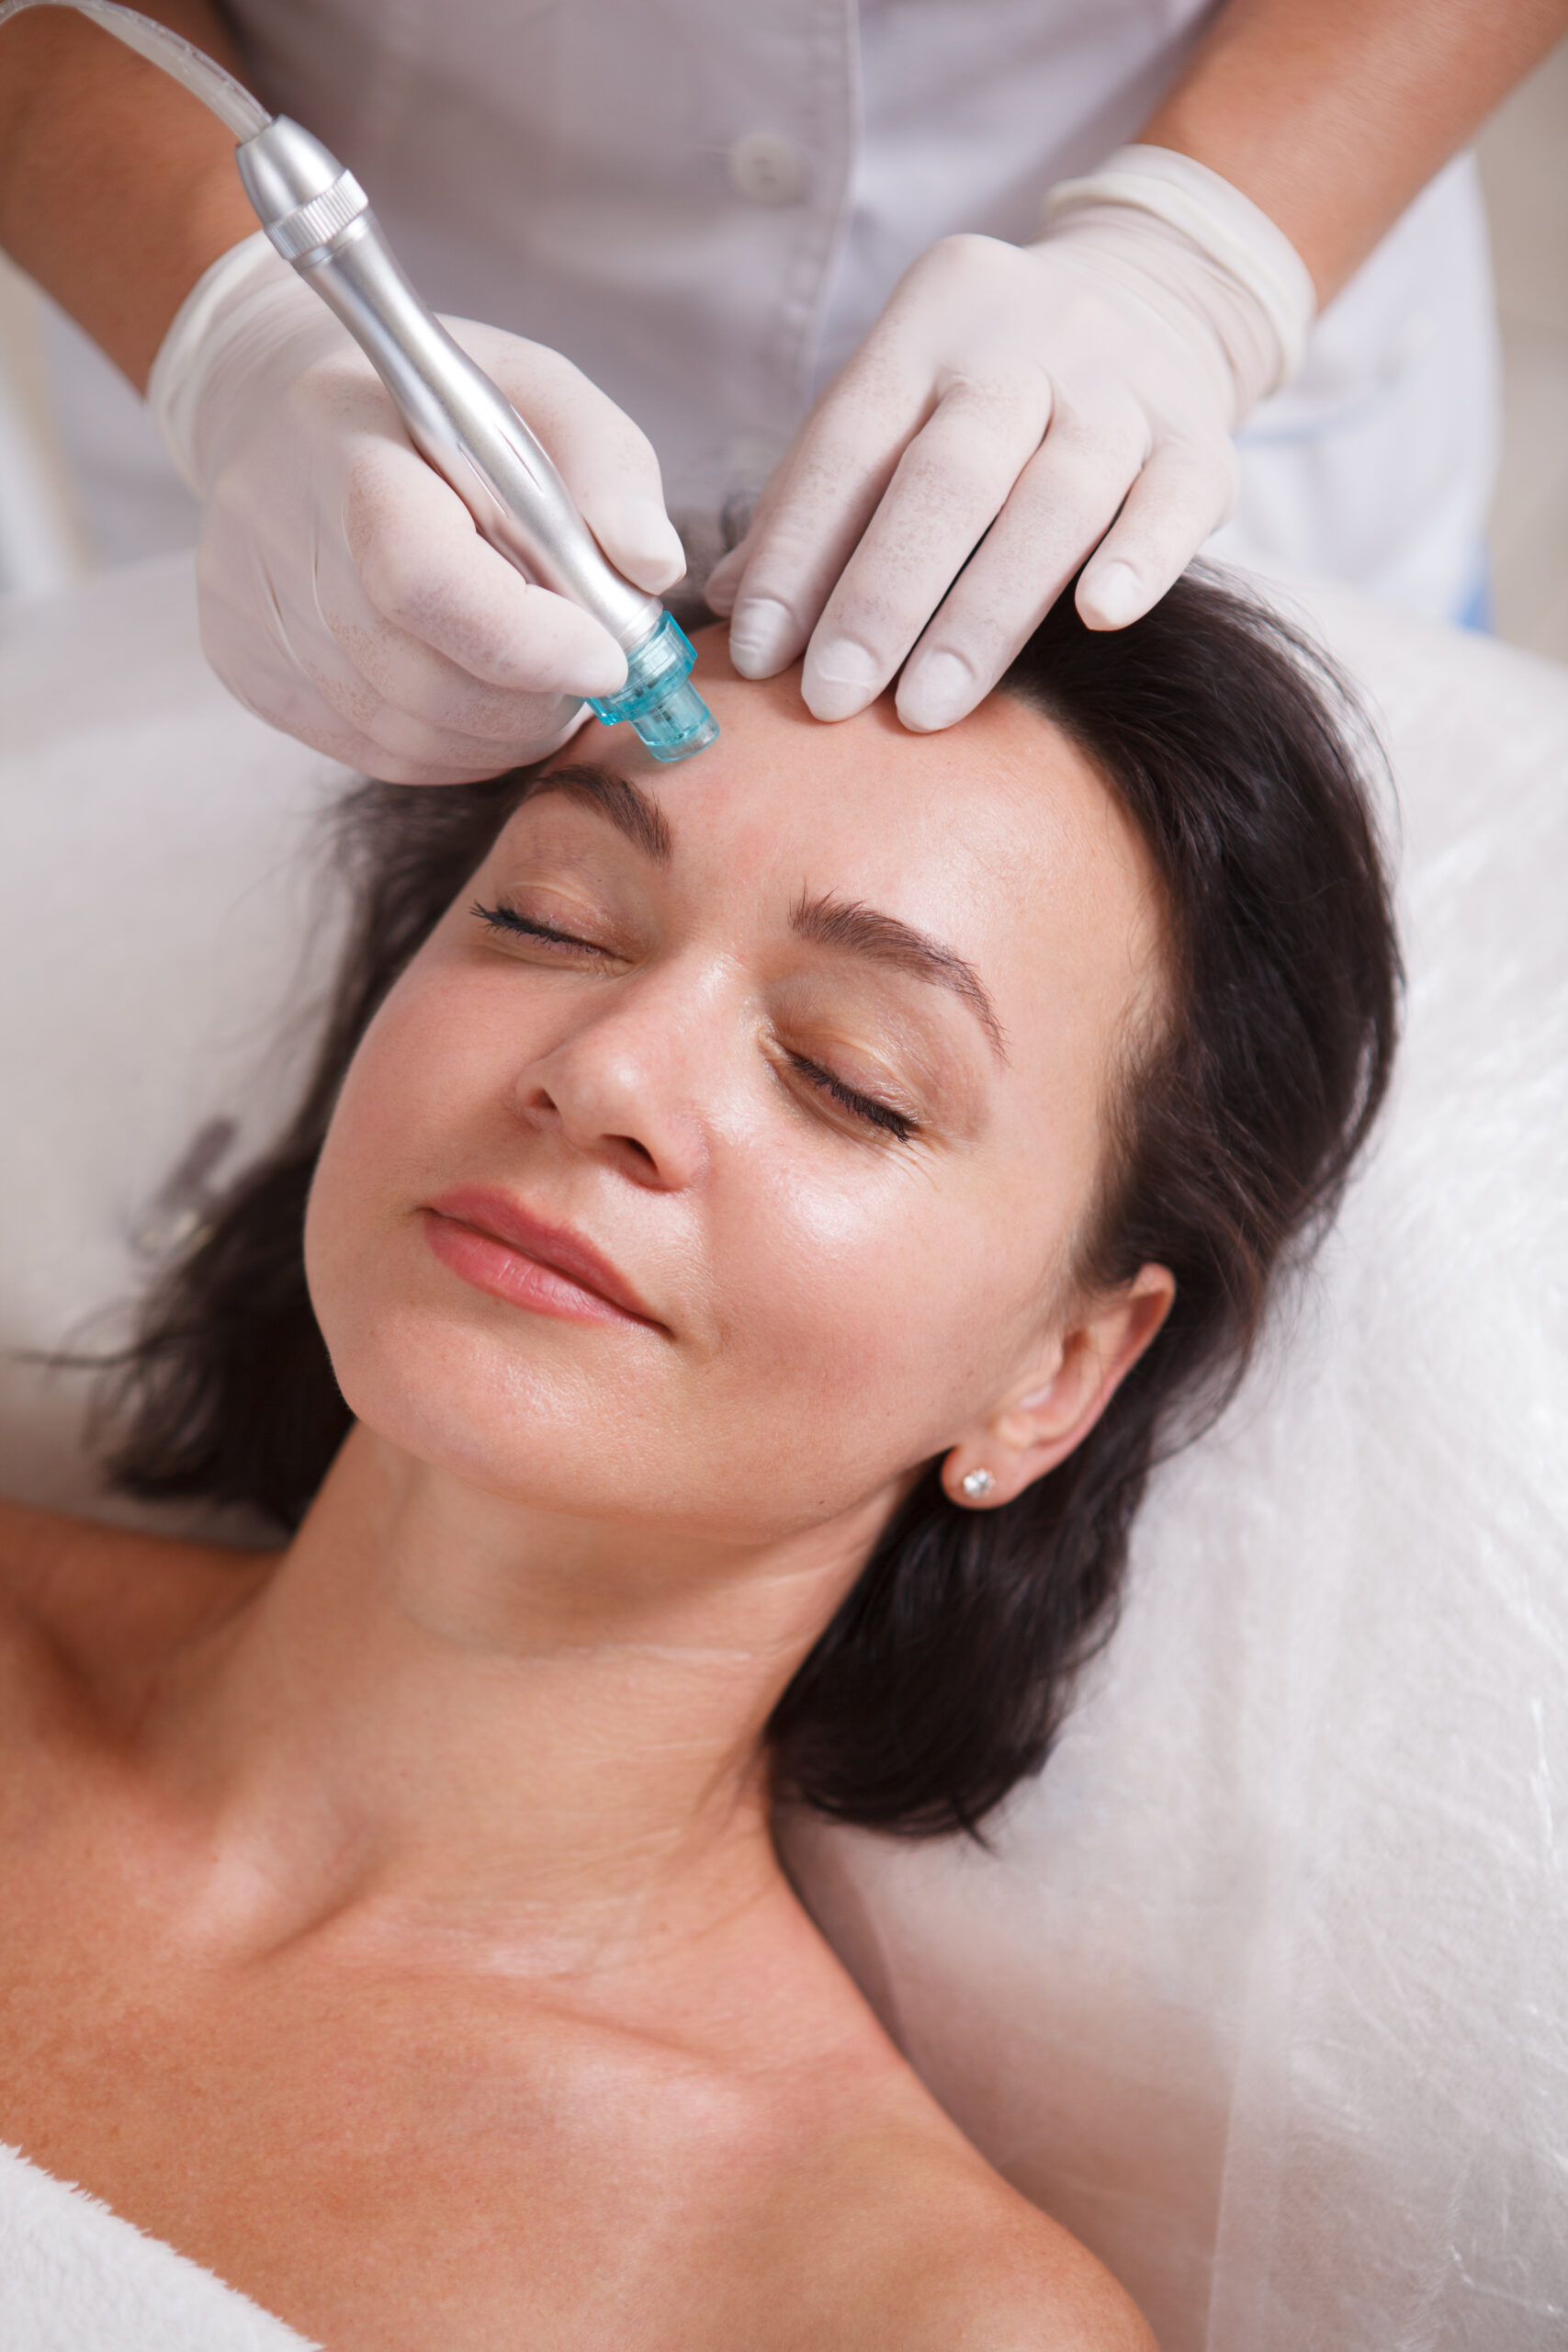 Vertical close up of a woman enjoying hydra pores cleaning procedure by cosmetician